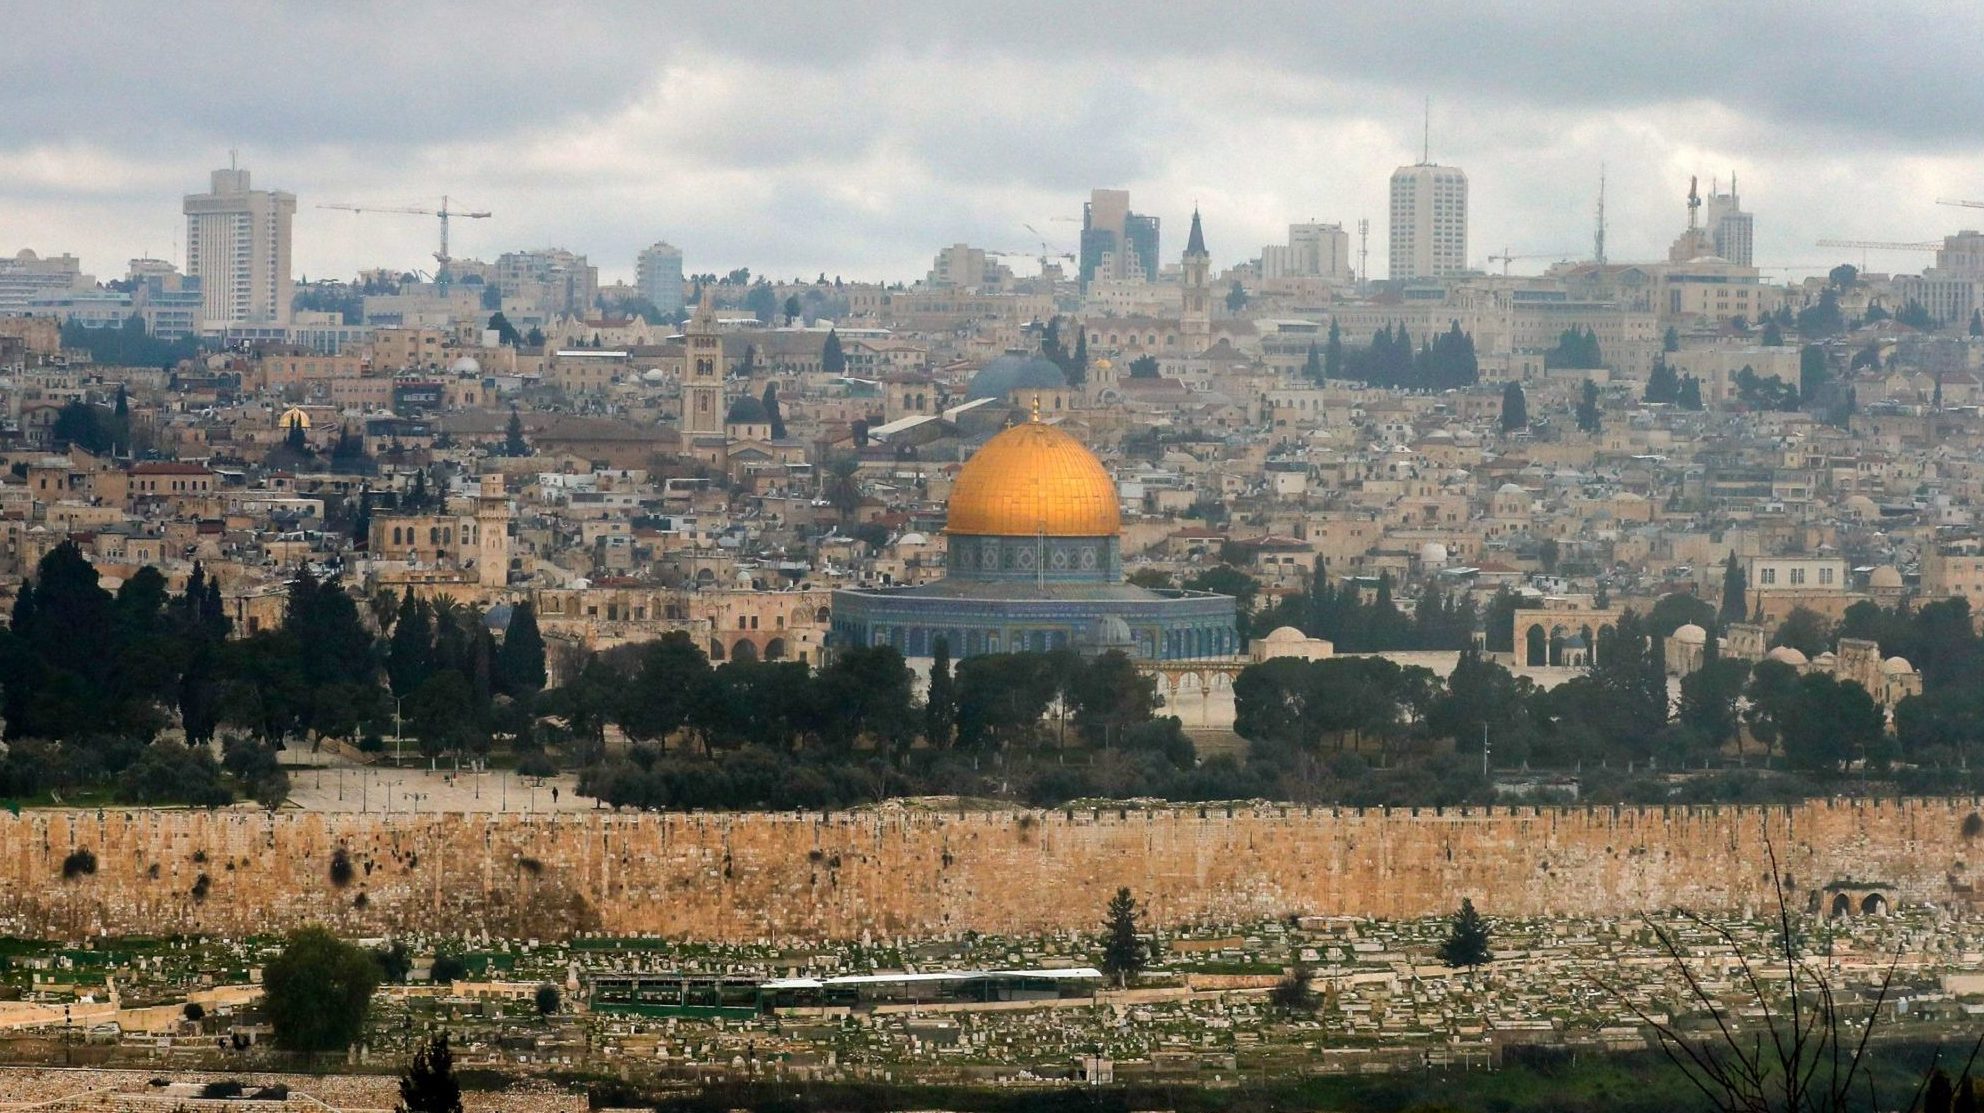 Palestinian Official: With State, E. Jerusalem as Capital, Peace Achievable in ‘2 Weeks’